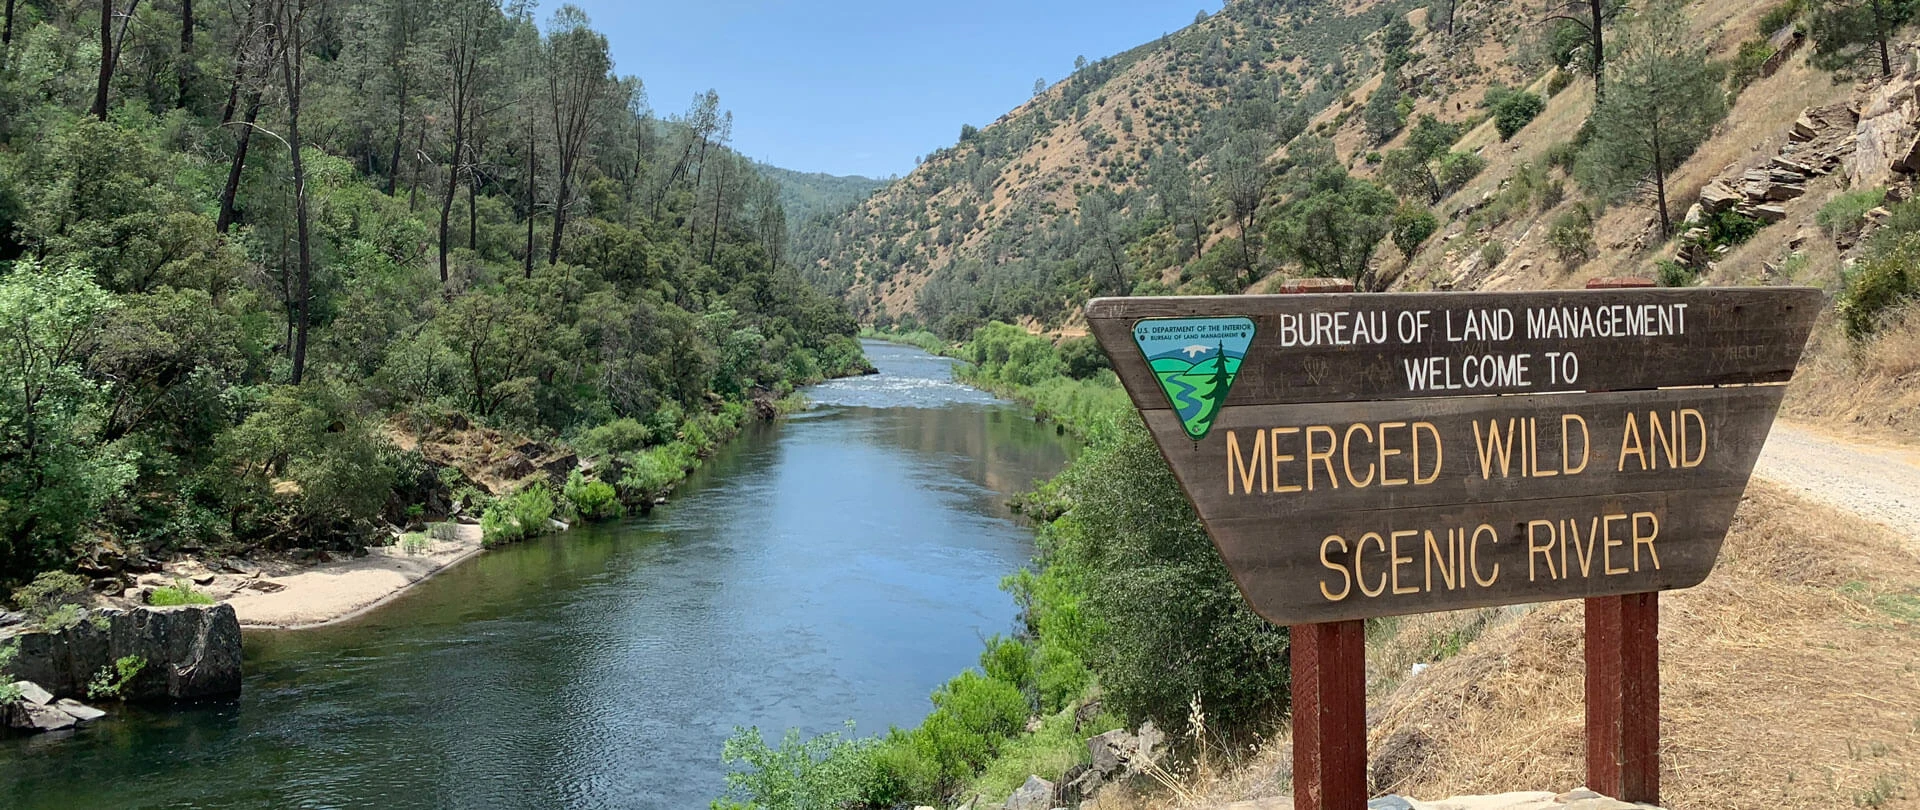 merced wild and scenic river